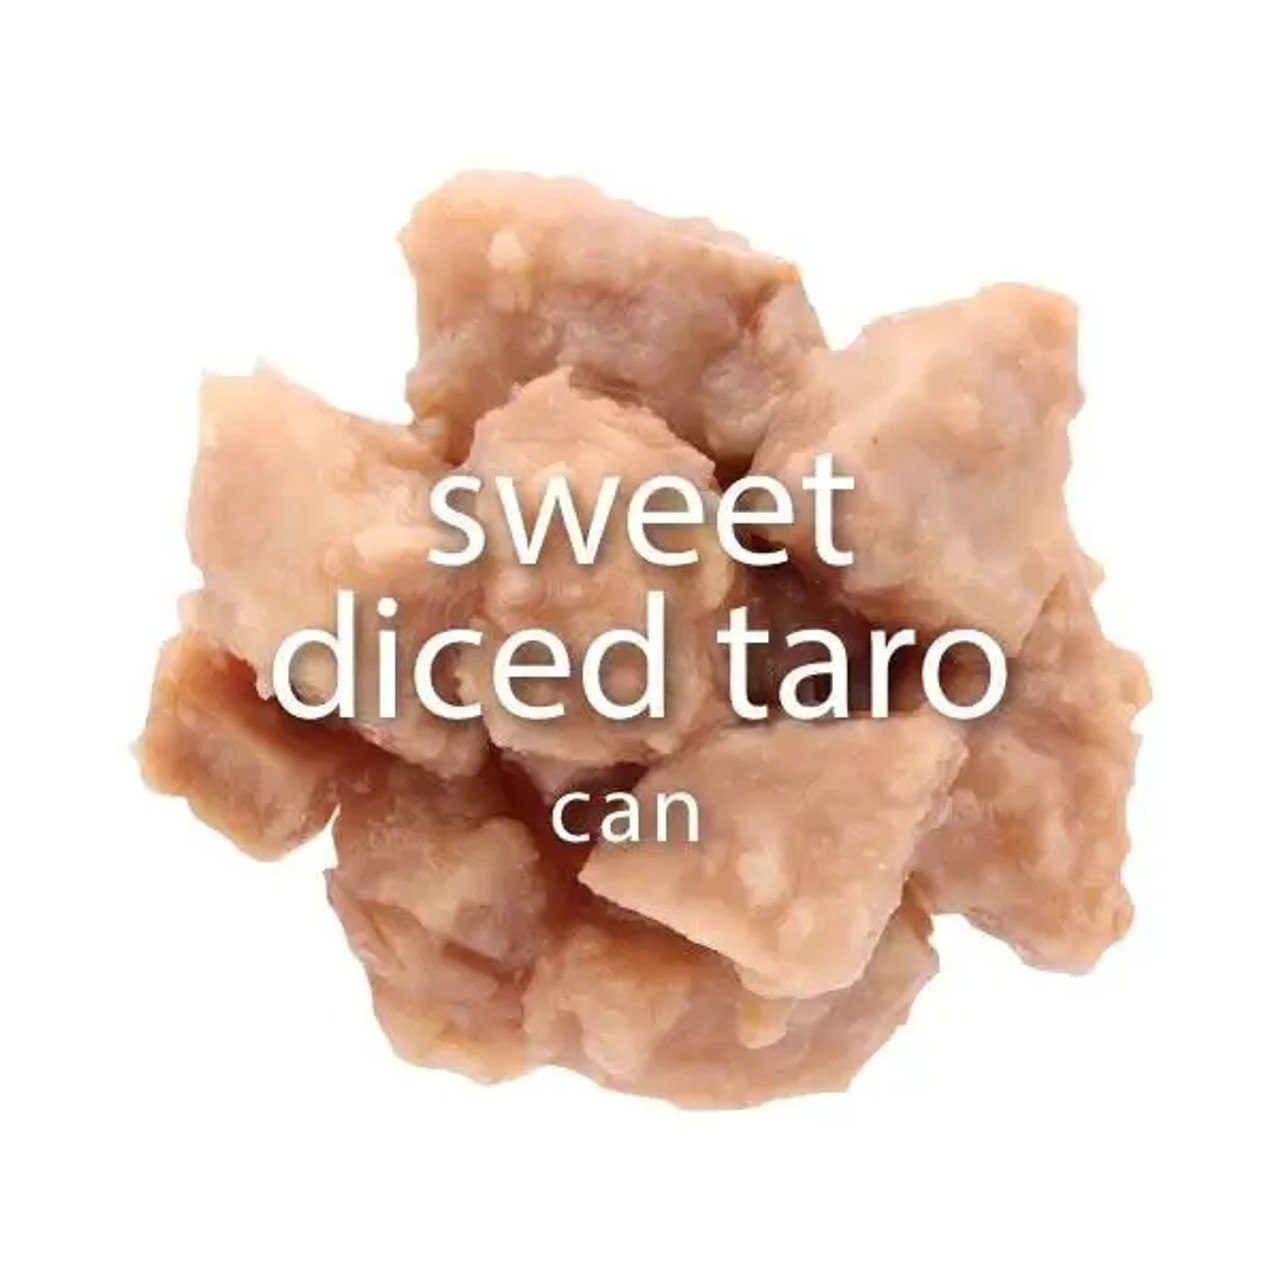 Bossen #10 Can Sweet Diced Taro Topping 7.28 lb. (3.3 kg) - 6/Case | Real Chunks-Chicken Pieces